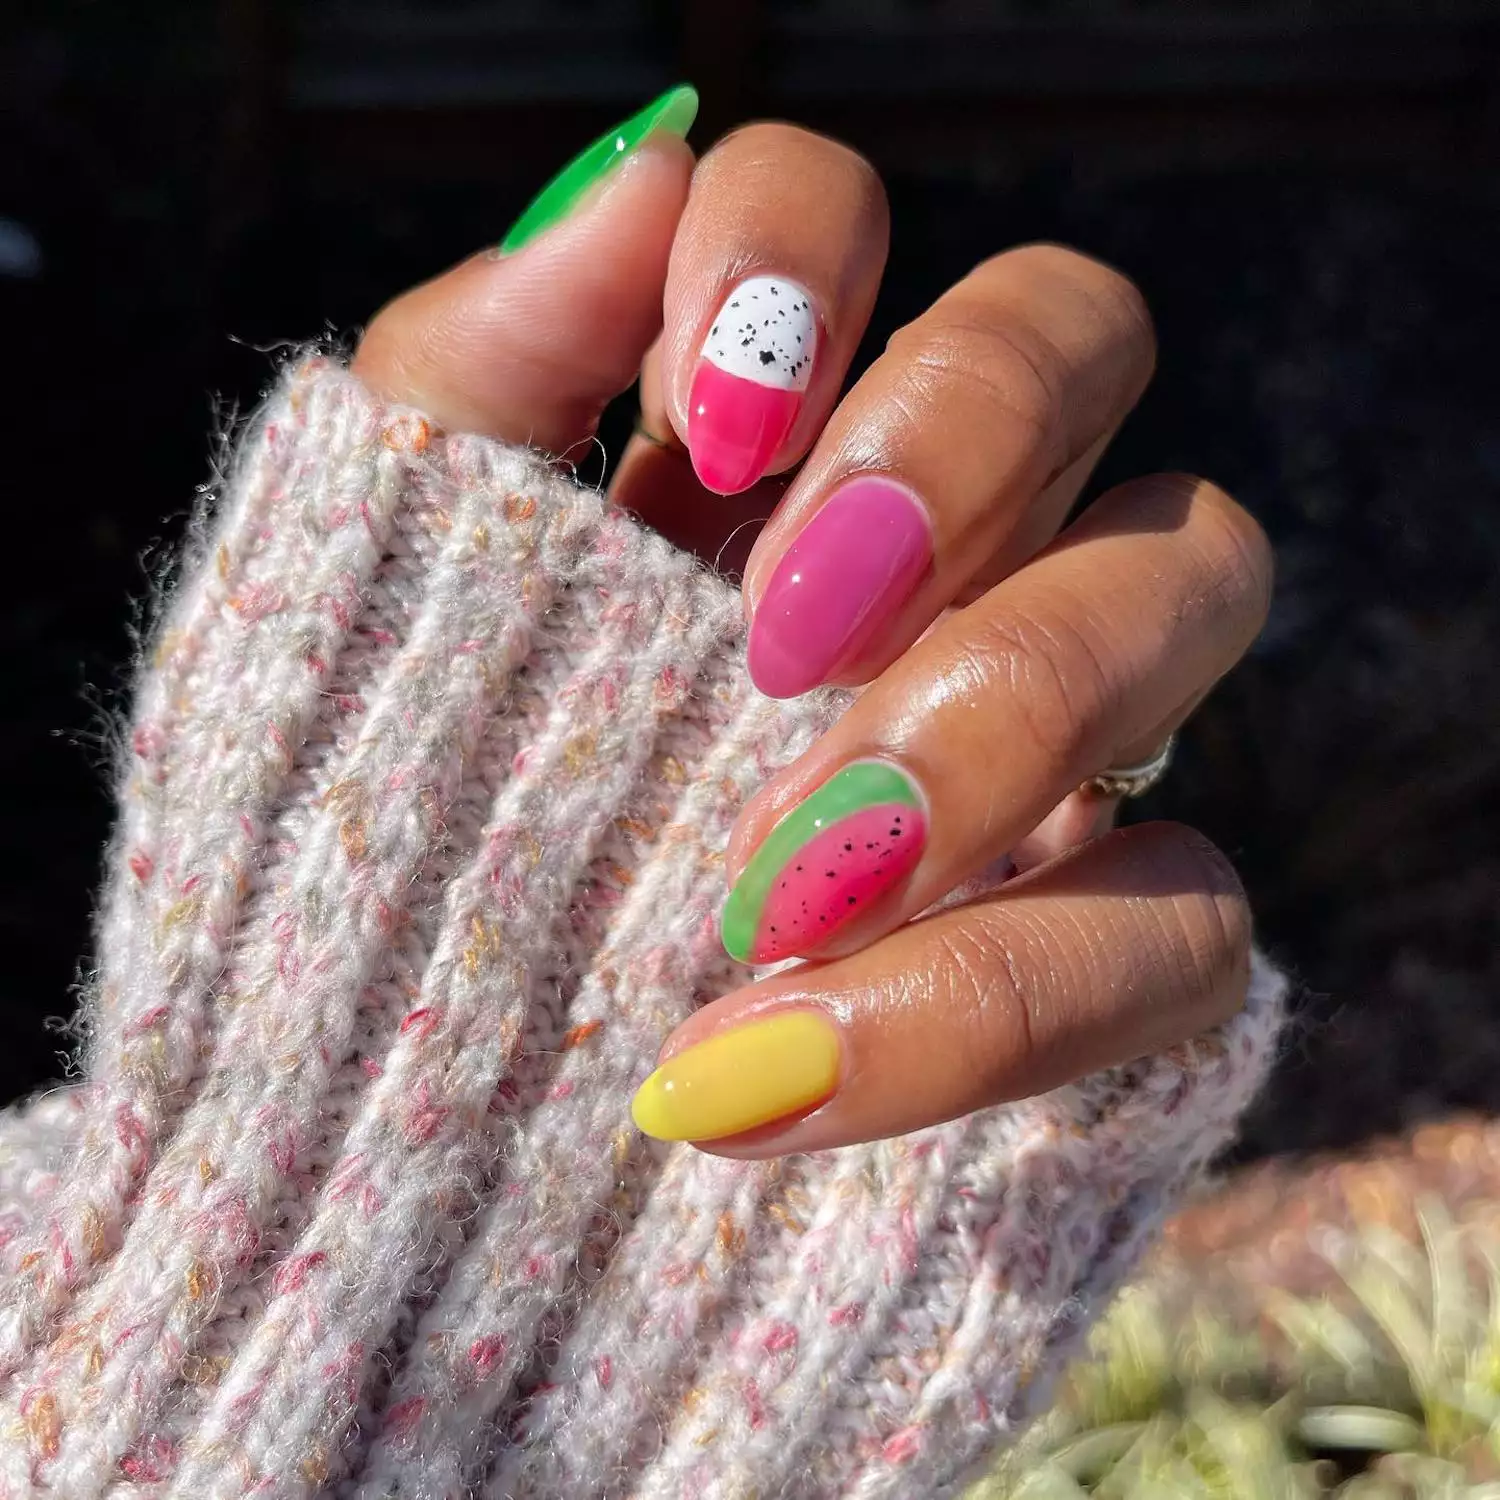 Manicure with watermelon and dragonfruit-inspired designs plus lime green, pink, and yellow solid nails